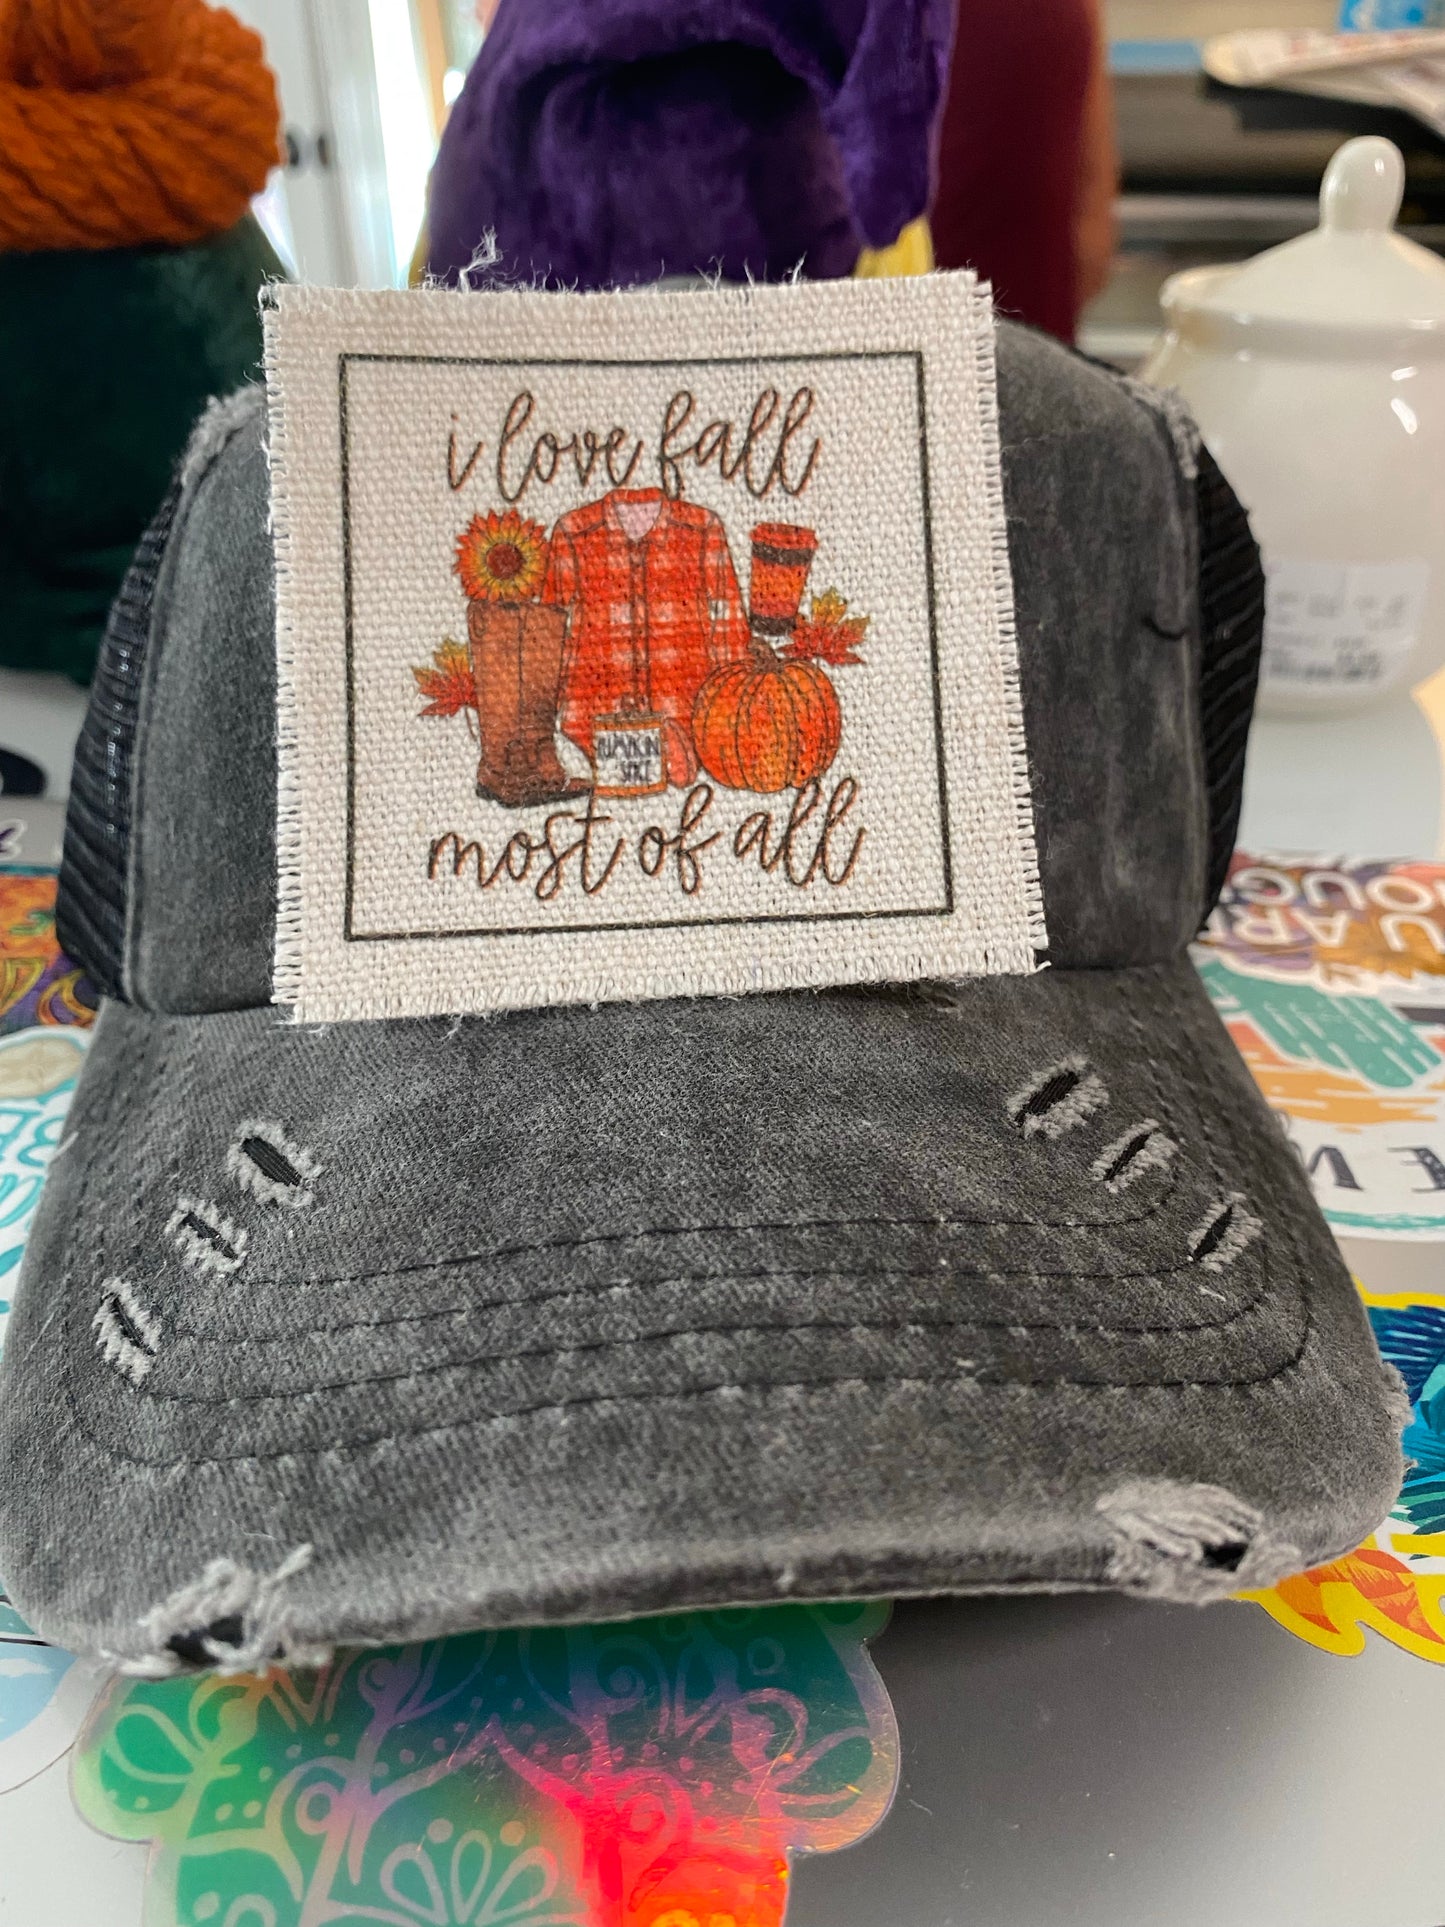 I Love Fall Most of All Hat Patch